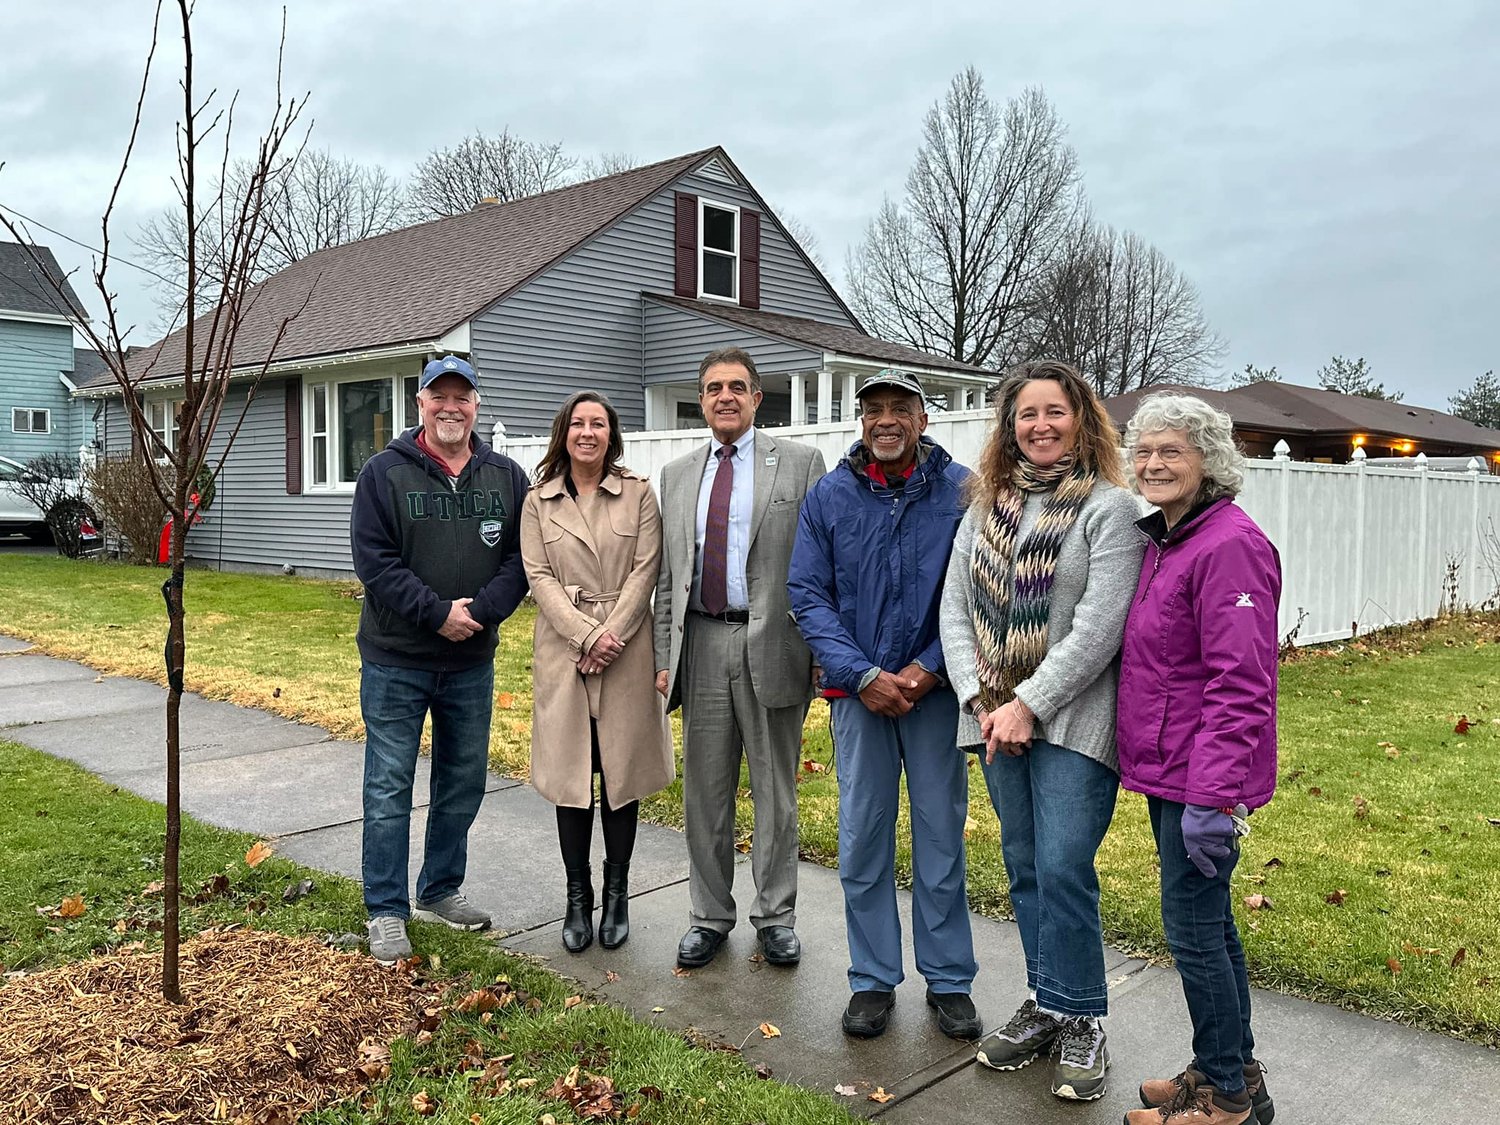 Jerry Kraus and Tina Pavlot from the Rotary Club of Utica, Utica Mayor Rob Palmieri, David Jones from the Rotary Club of Utica, homeowner Lynne Morinitti and Barbara Freeman from the Unitarian Universalist Church’s Climate Action Team stand alongside a blossoming cherry tree.